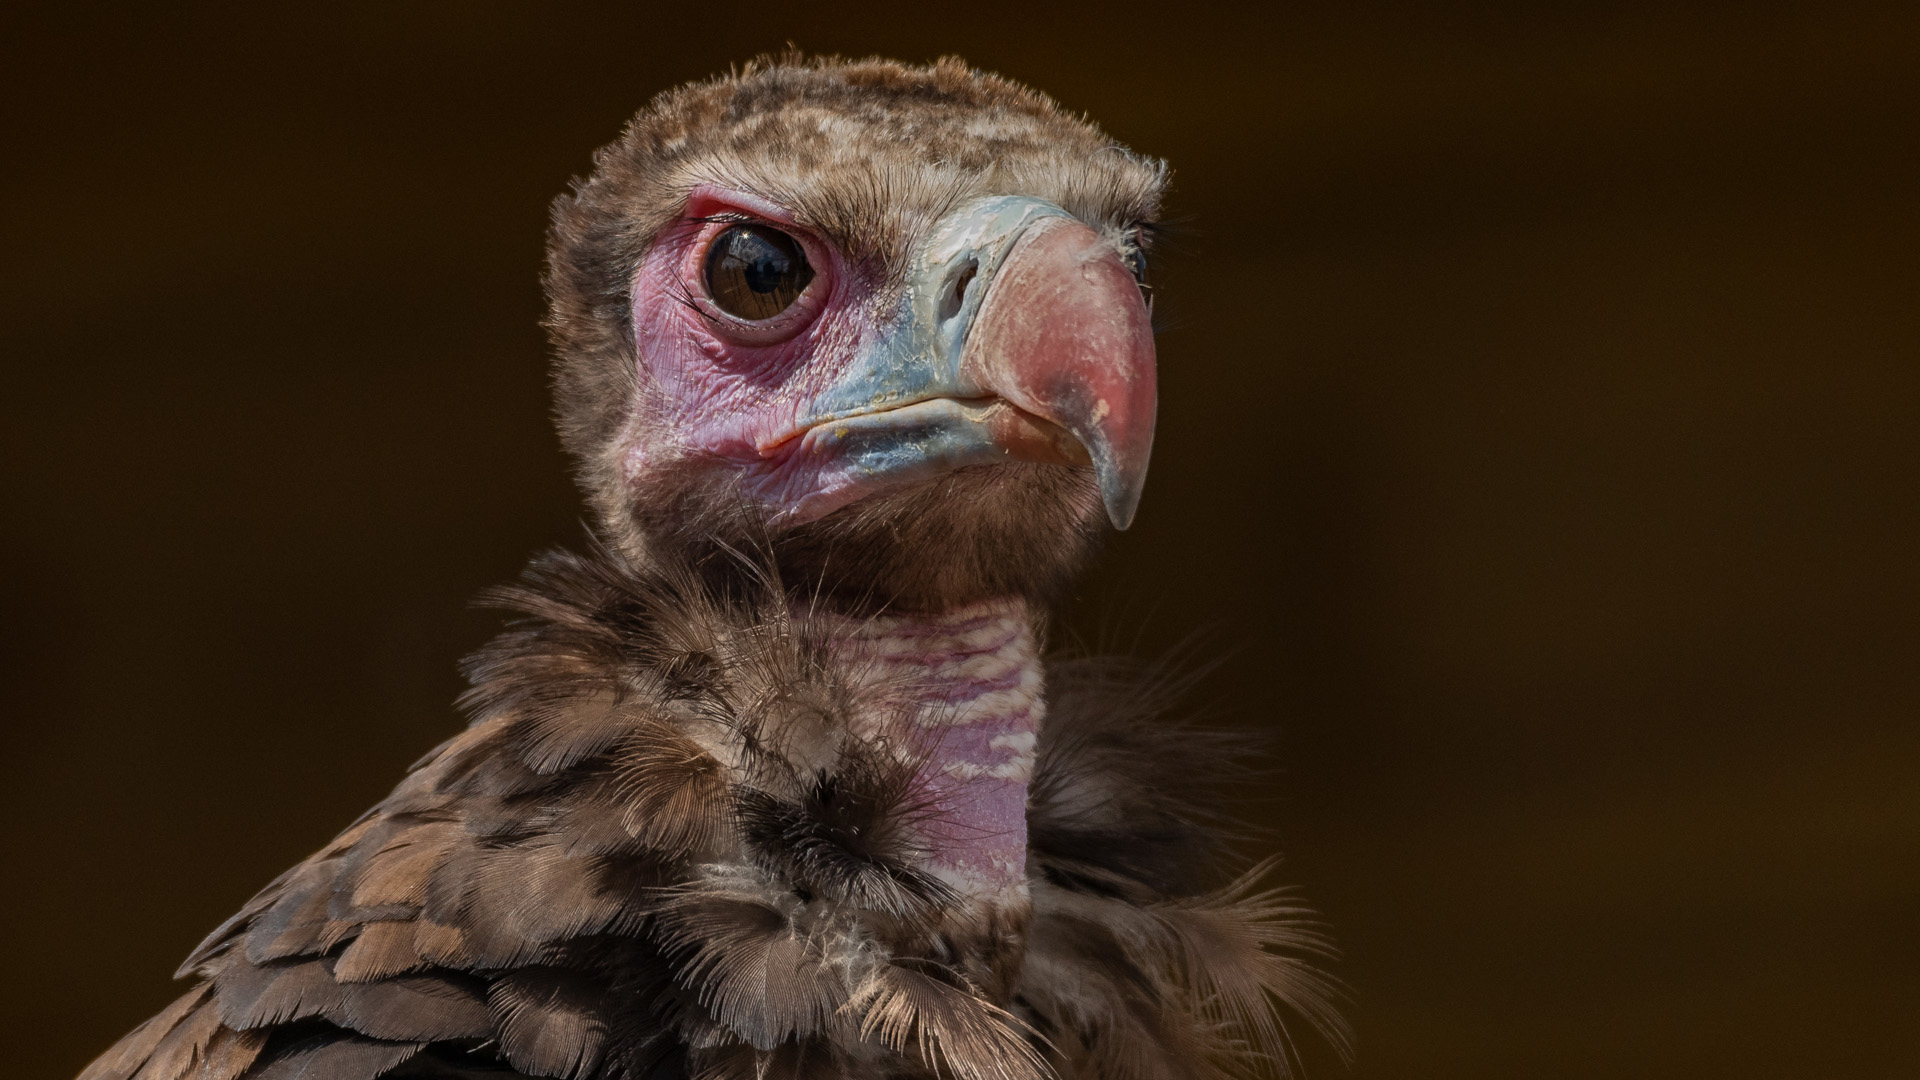 A close up of hooded-vulture sitting